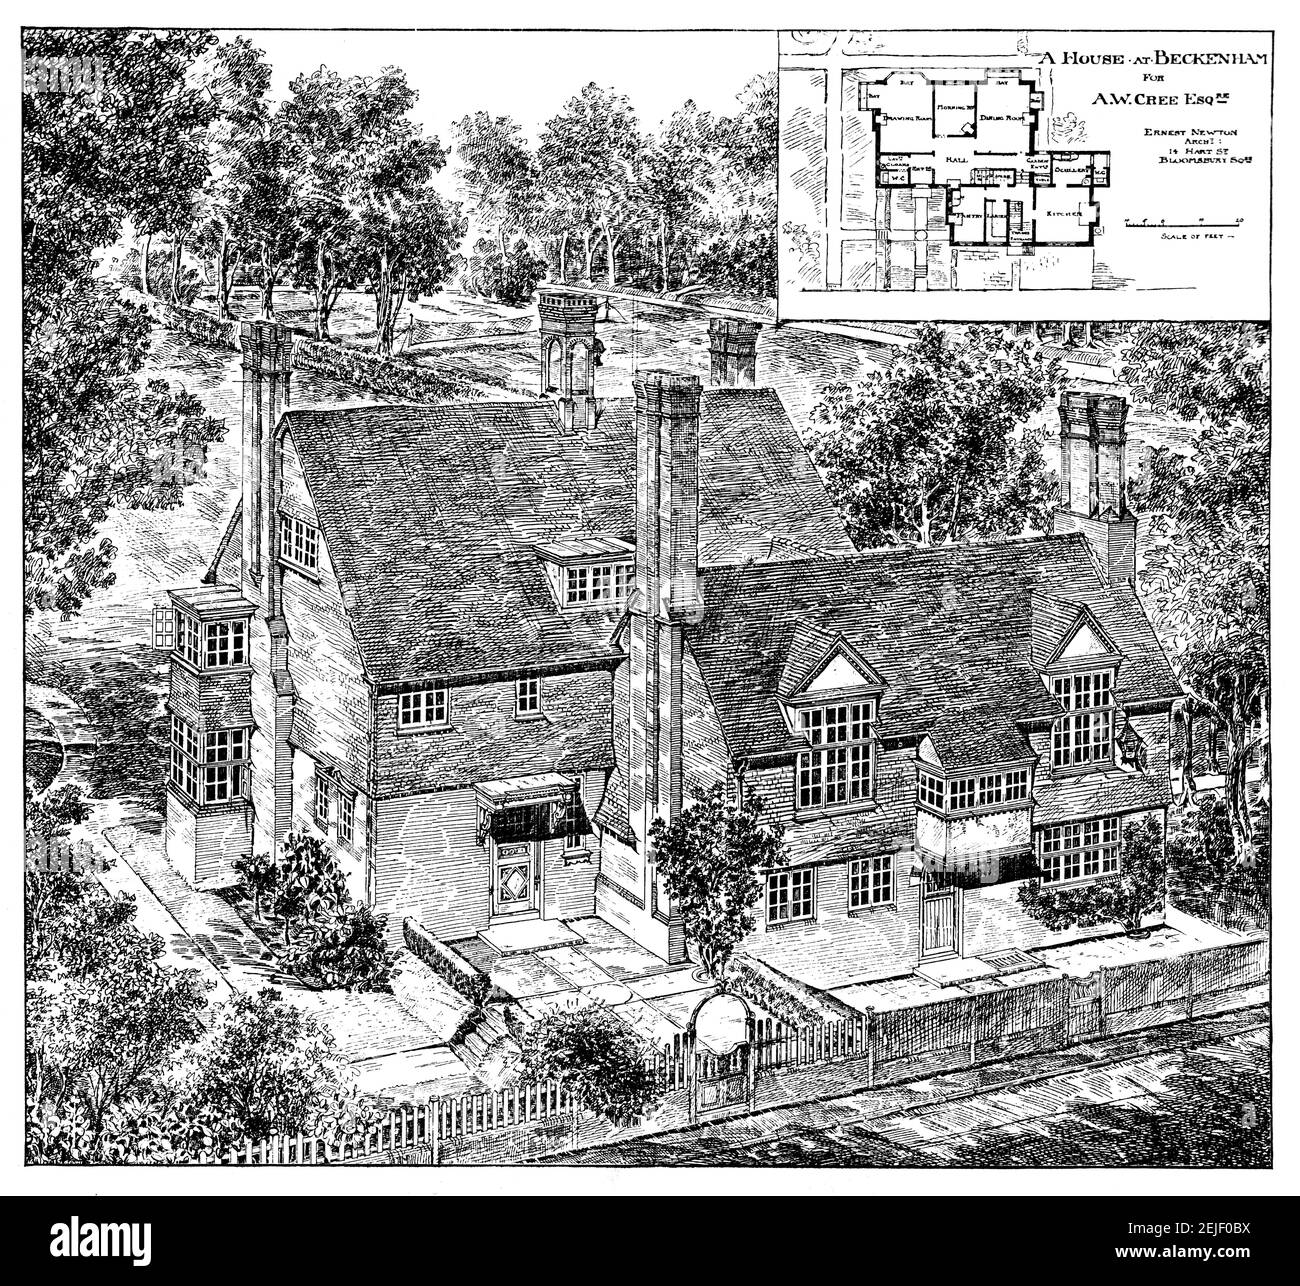 Arts and Crafts house at Beckenham for A W Cree Esq, design by Ernest Newton, Architect, by George Montague Ellwood illustration from 1899 The Studio Stock Photo